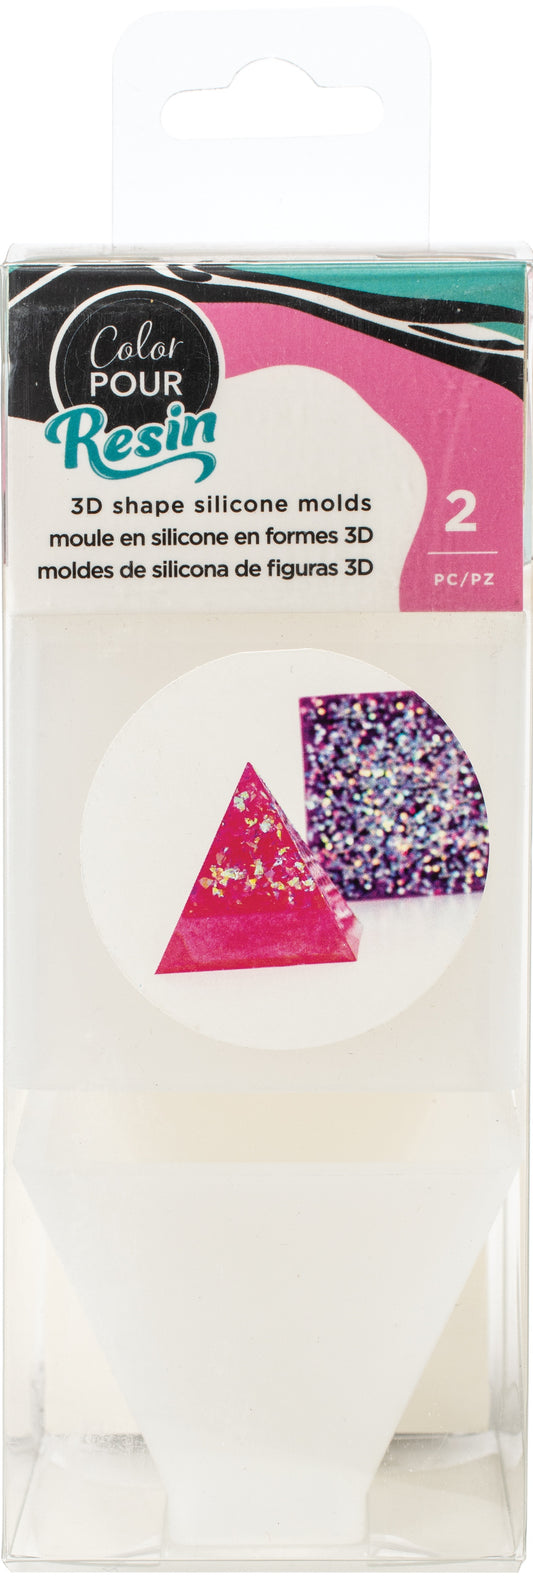 Primary Shell Flakes - Color Pour Resin - American Crafts*